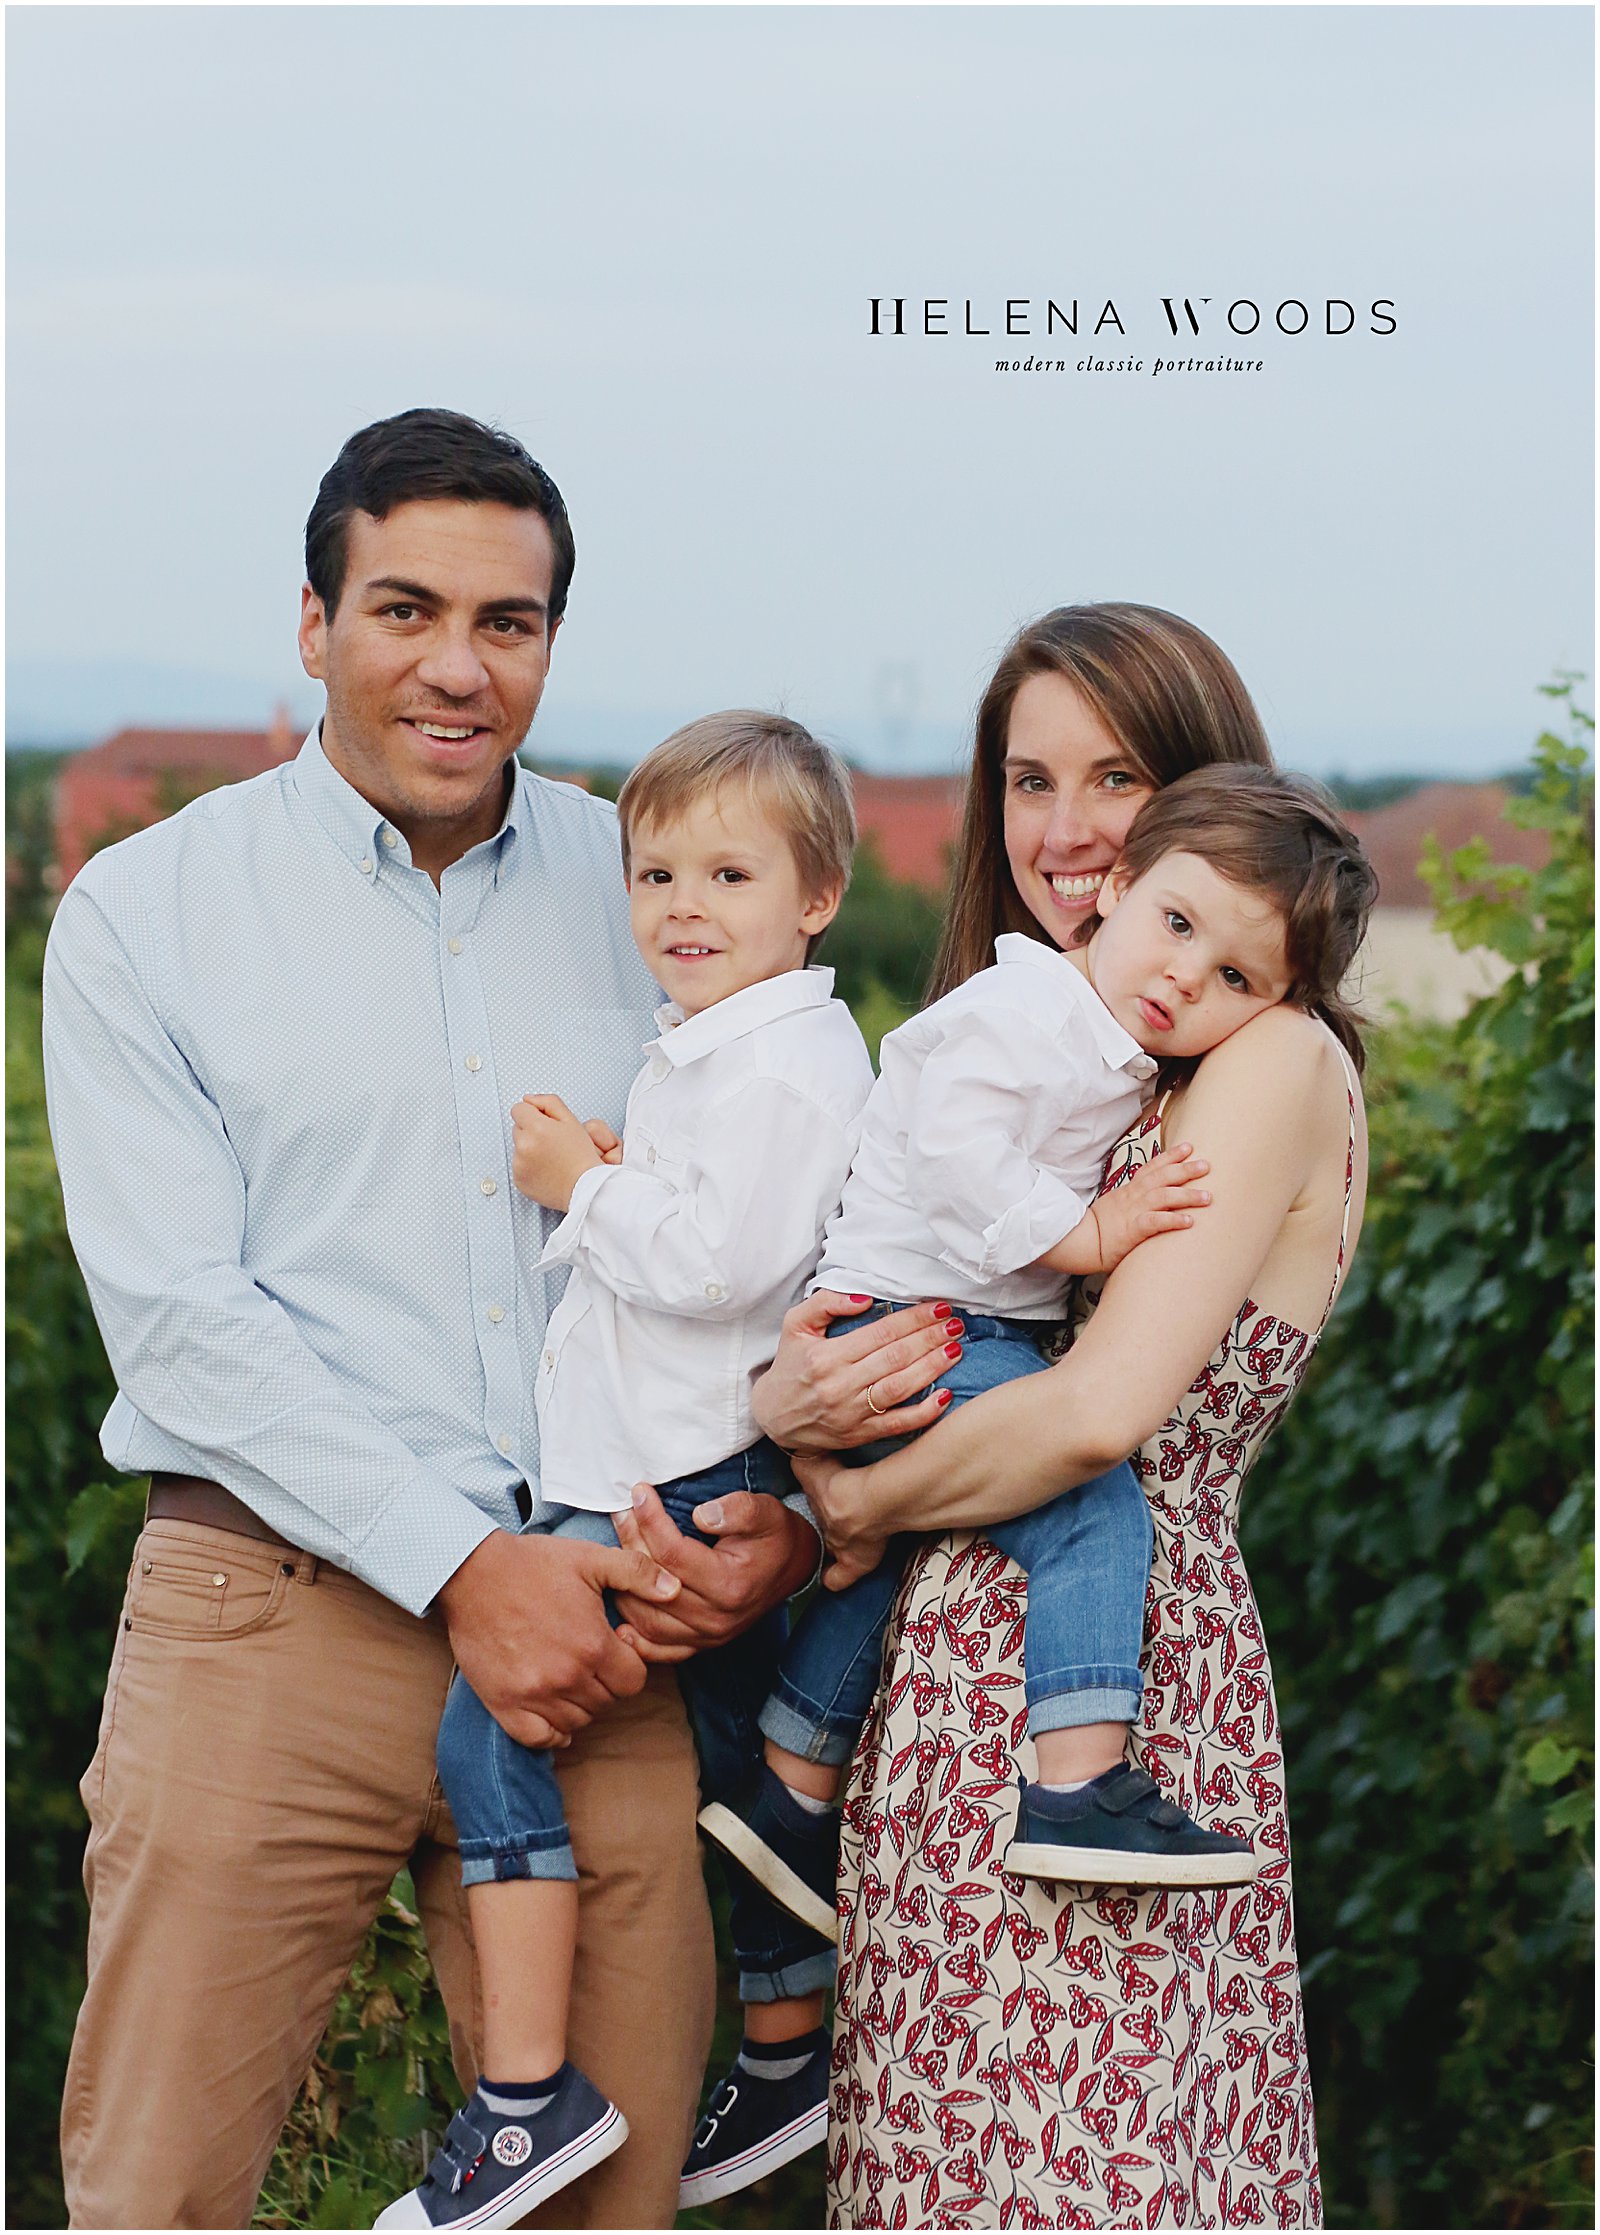 portraits in the vineyards of Wettolsheim Alsace France with Family Photographer Helena Woods